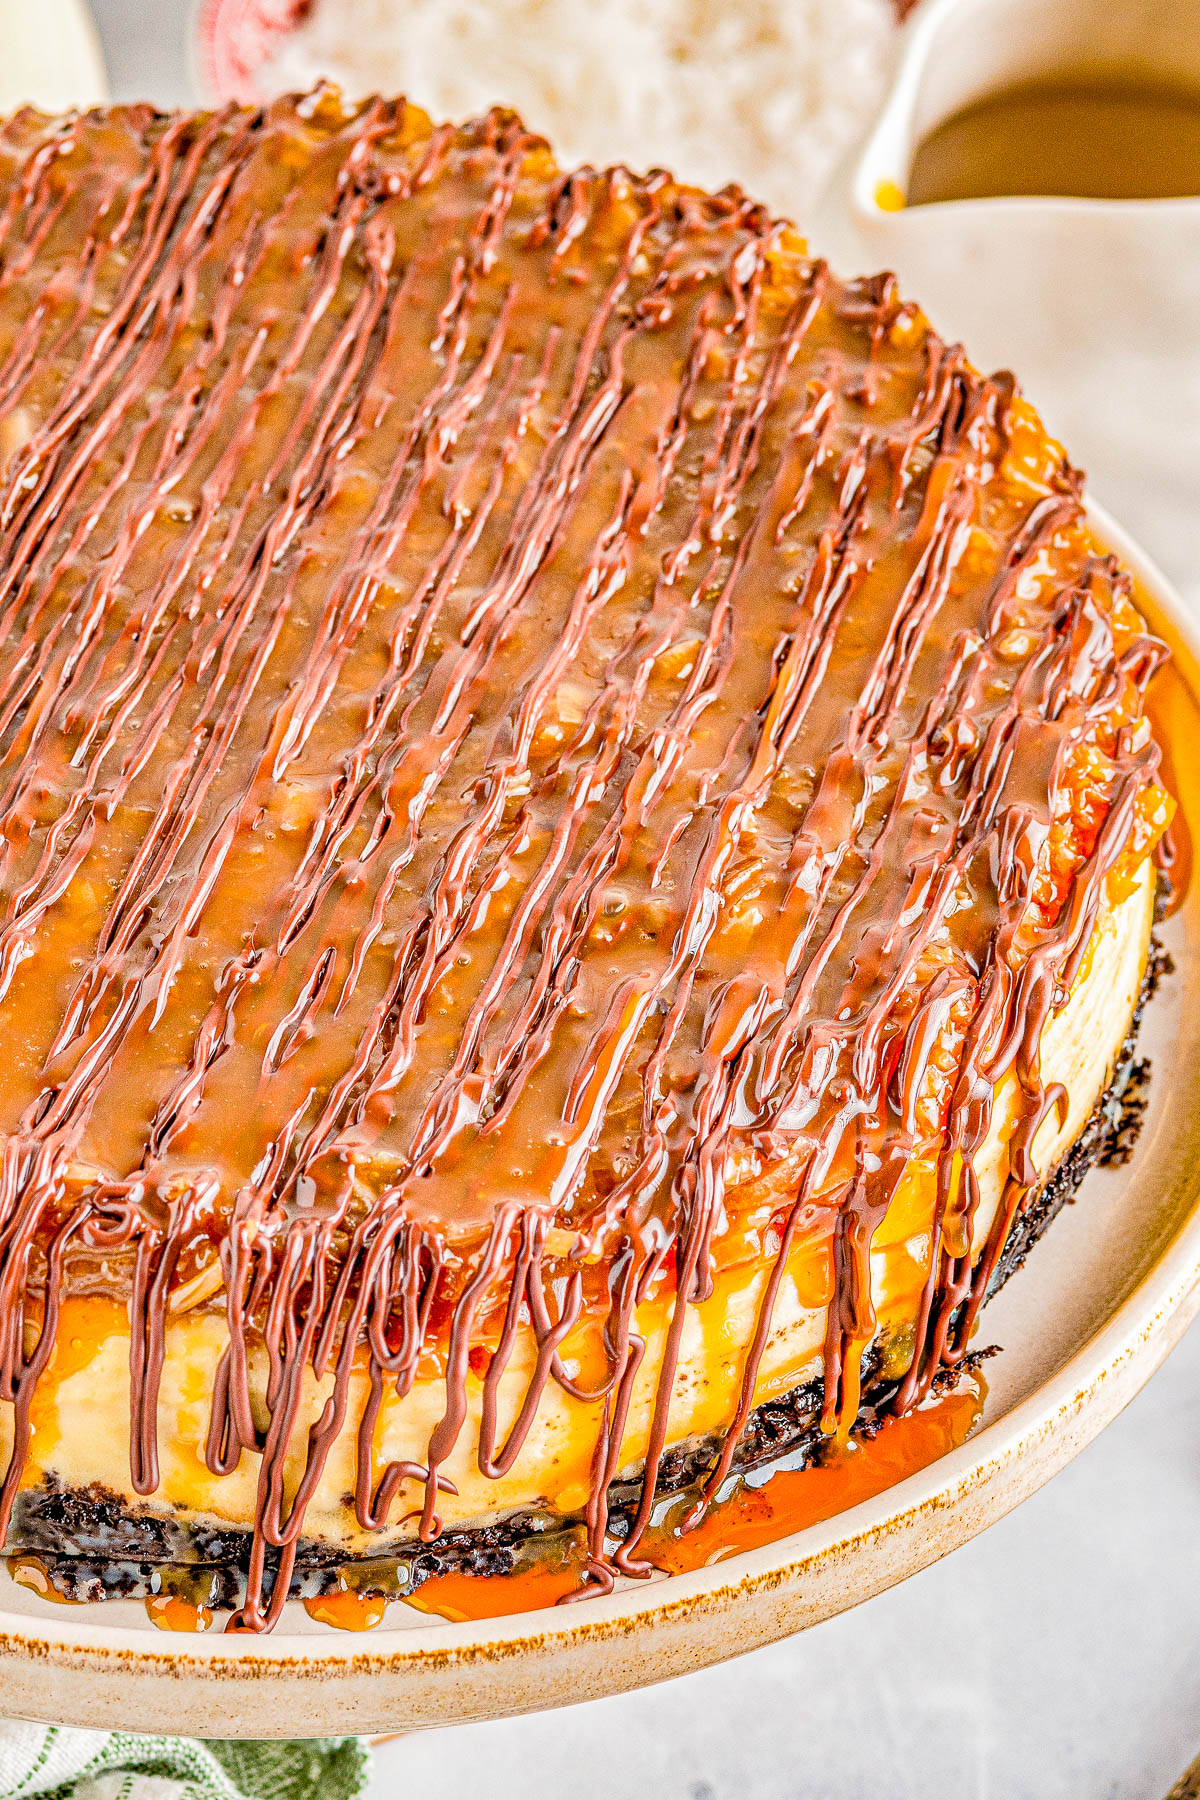 amoa Cheesecake - Smooth, creamy cheesecake with an Oreo crust and topped with chewy toasted coconut, caramel, and chocolate! If you're a fan of Girl Scout Samoas Cookies, this homemade rich and decadent cheesecake with the same flavors is PURE PERFECTION! Clear and easy directions even if you've never made a cheesecake so yours turns out amazing.